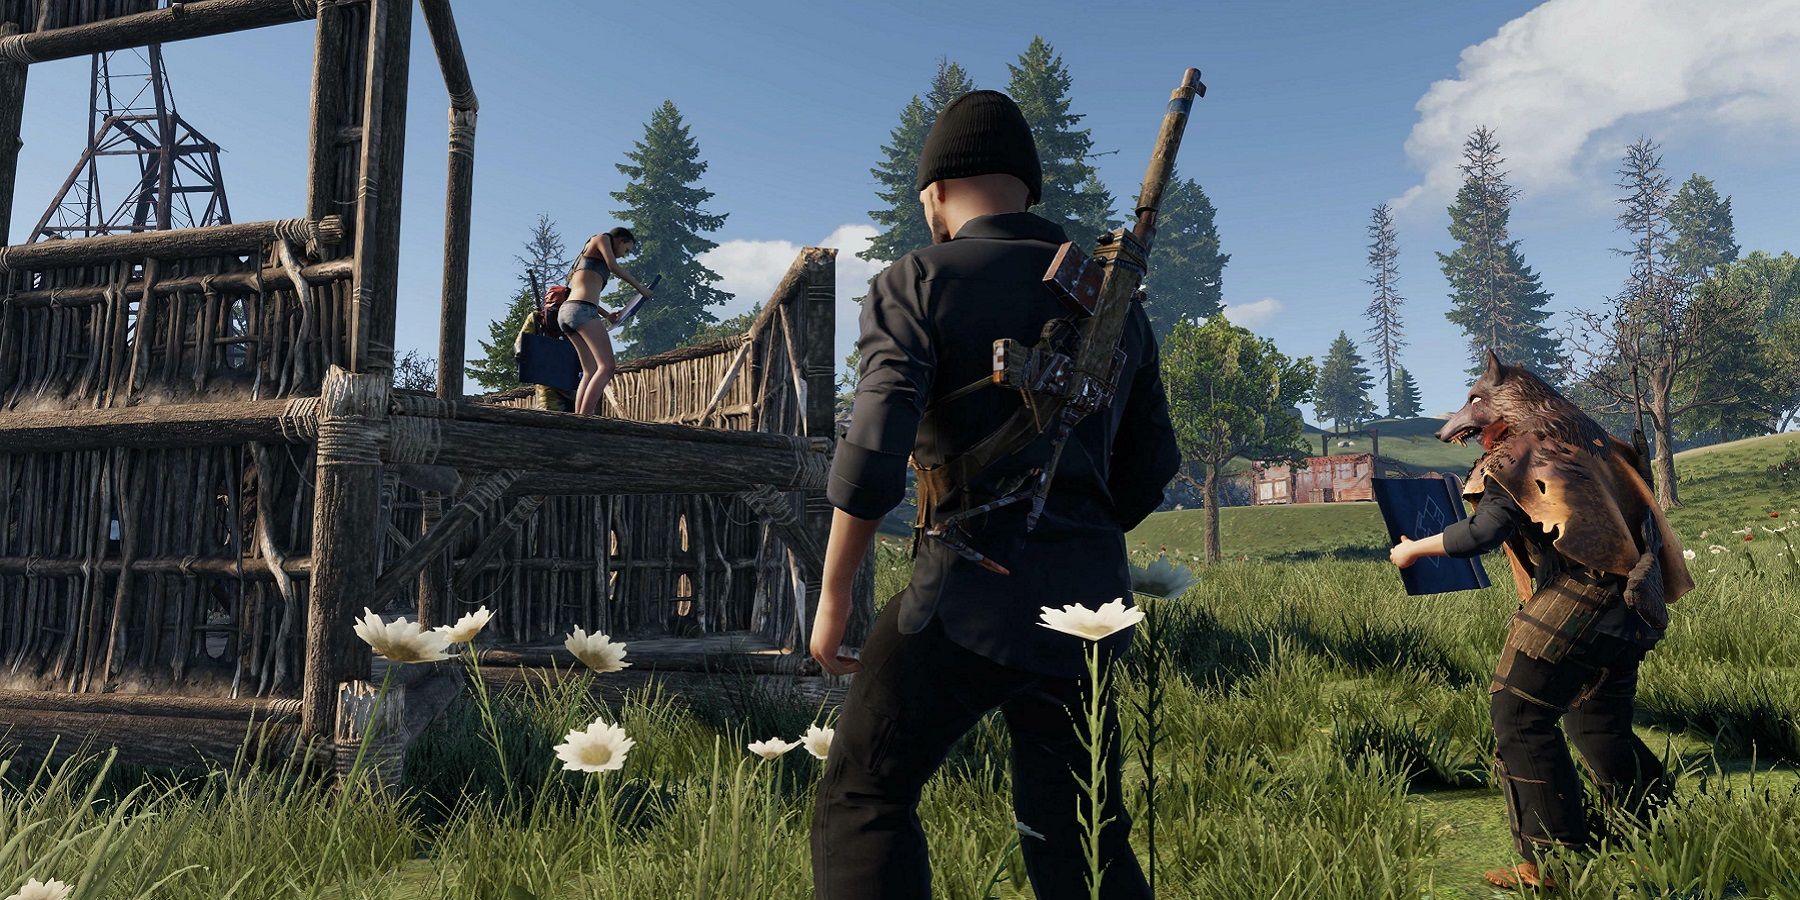 Screenshot from Rust showing three players gathered around a settlement.